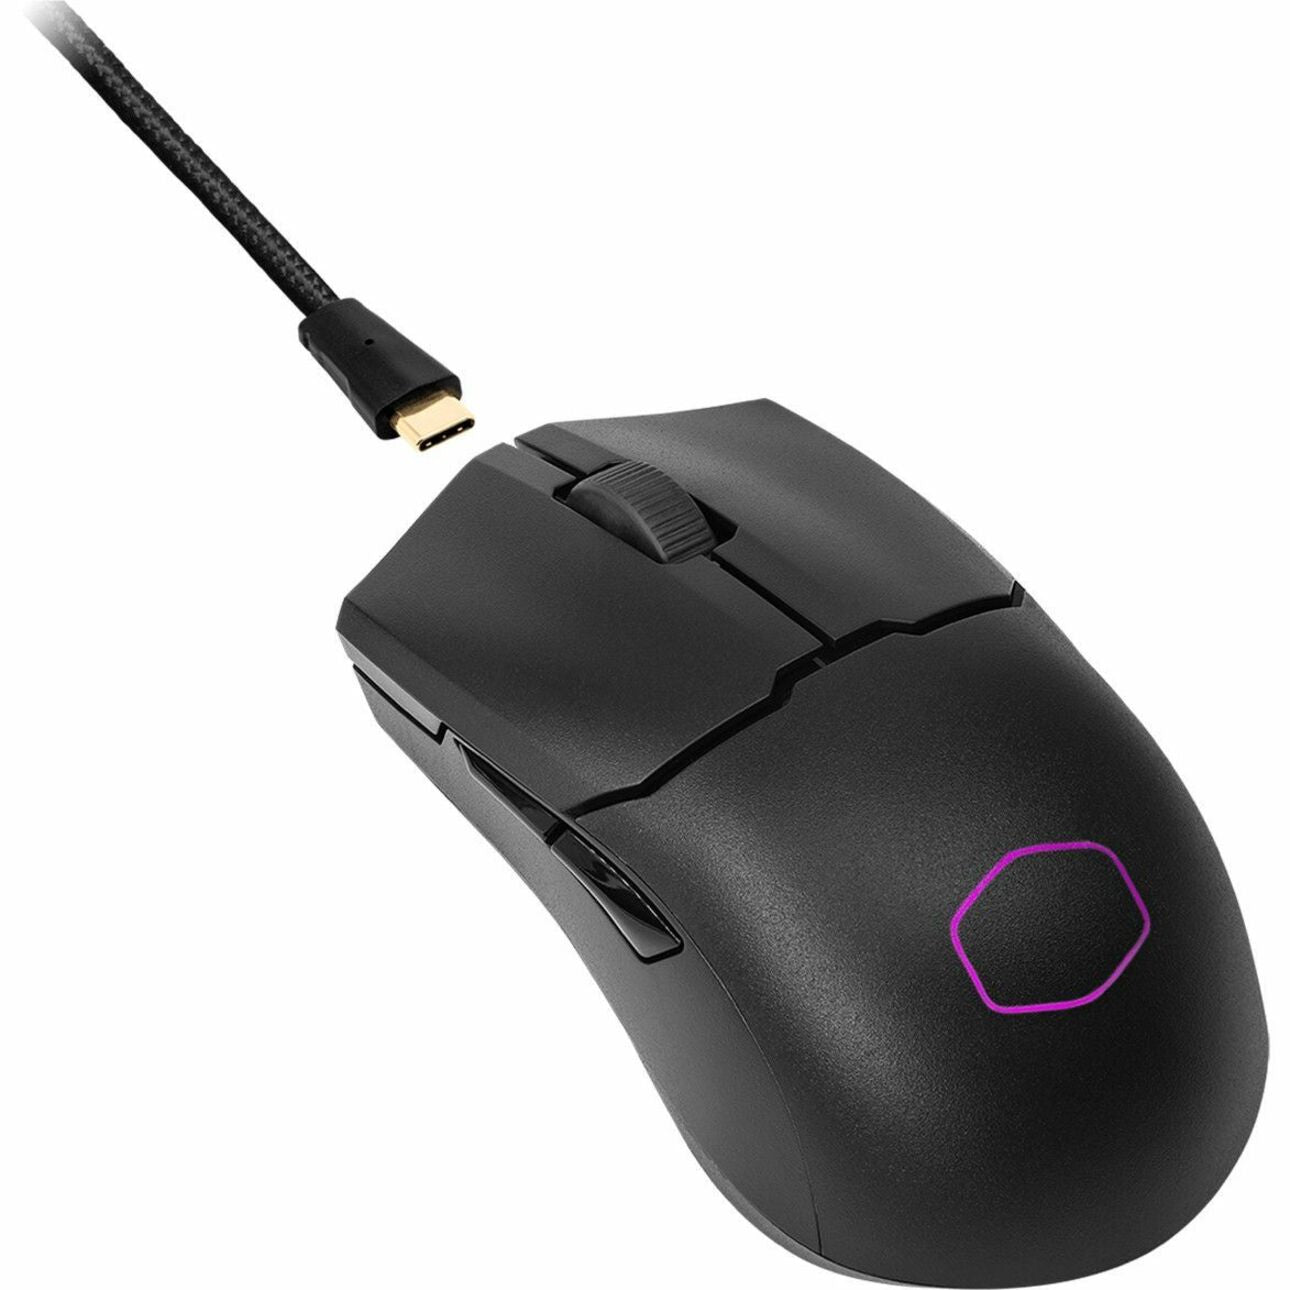 Cooler Master MM-712-KKOH1 MM712 Gaming Mouse, Rechargeable, 19000 dpi, Bluetooth 5.1, 2-Year Warranty